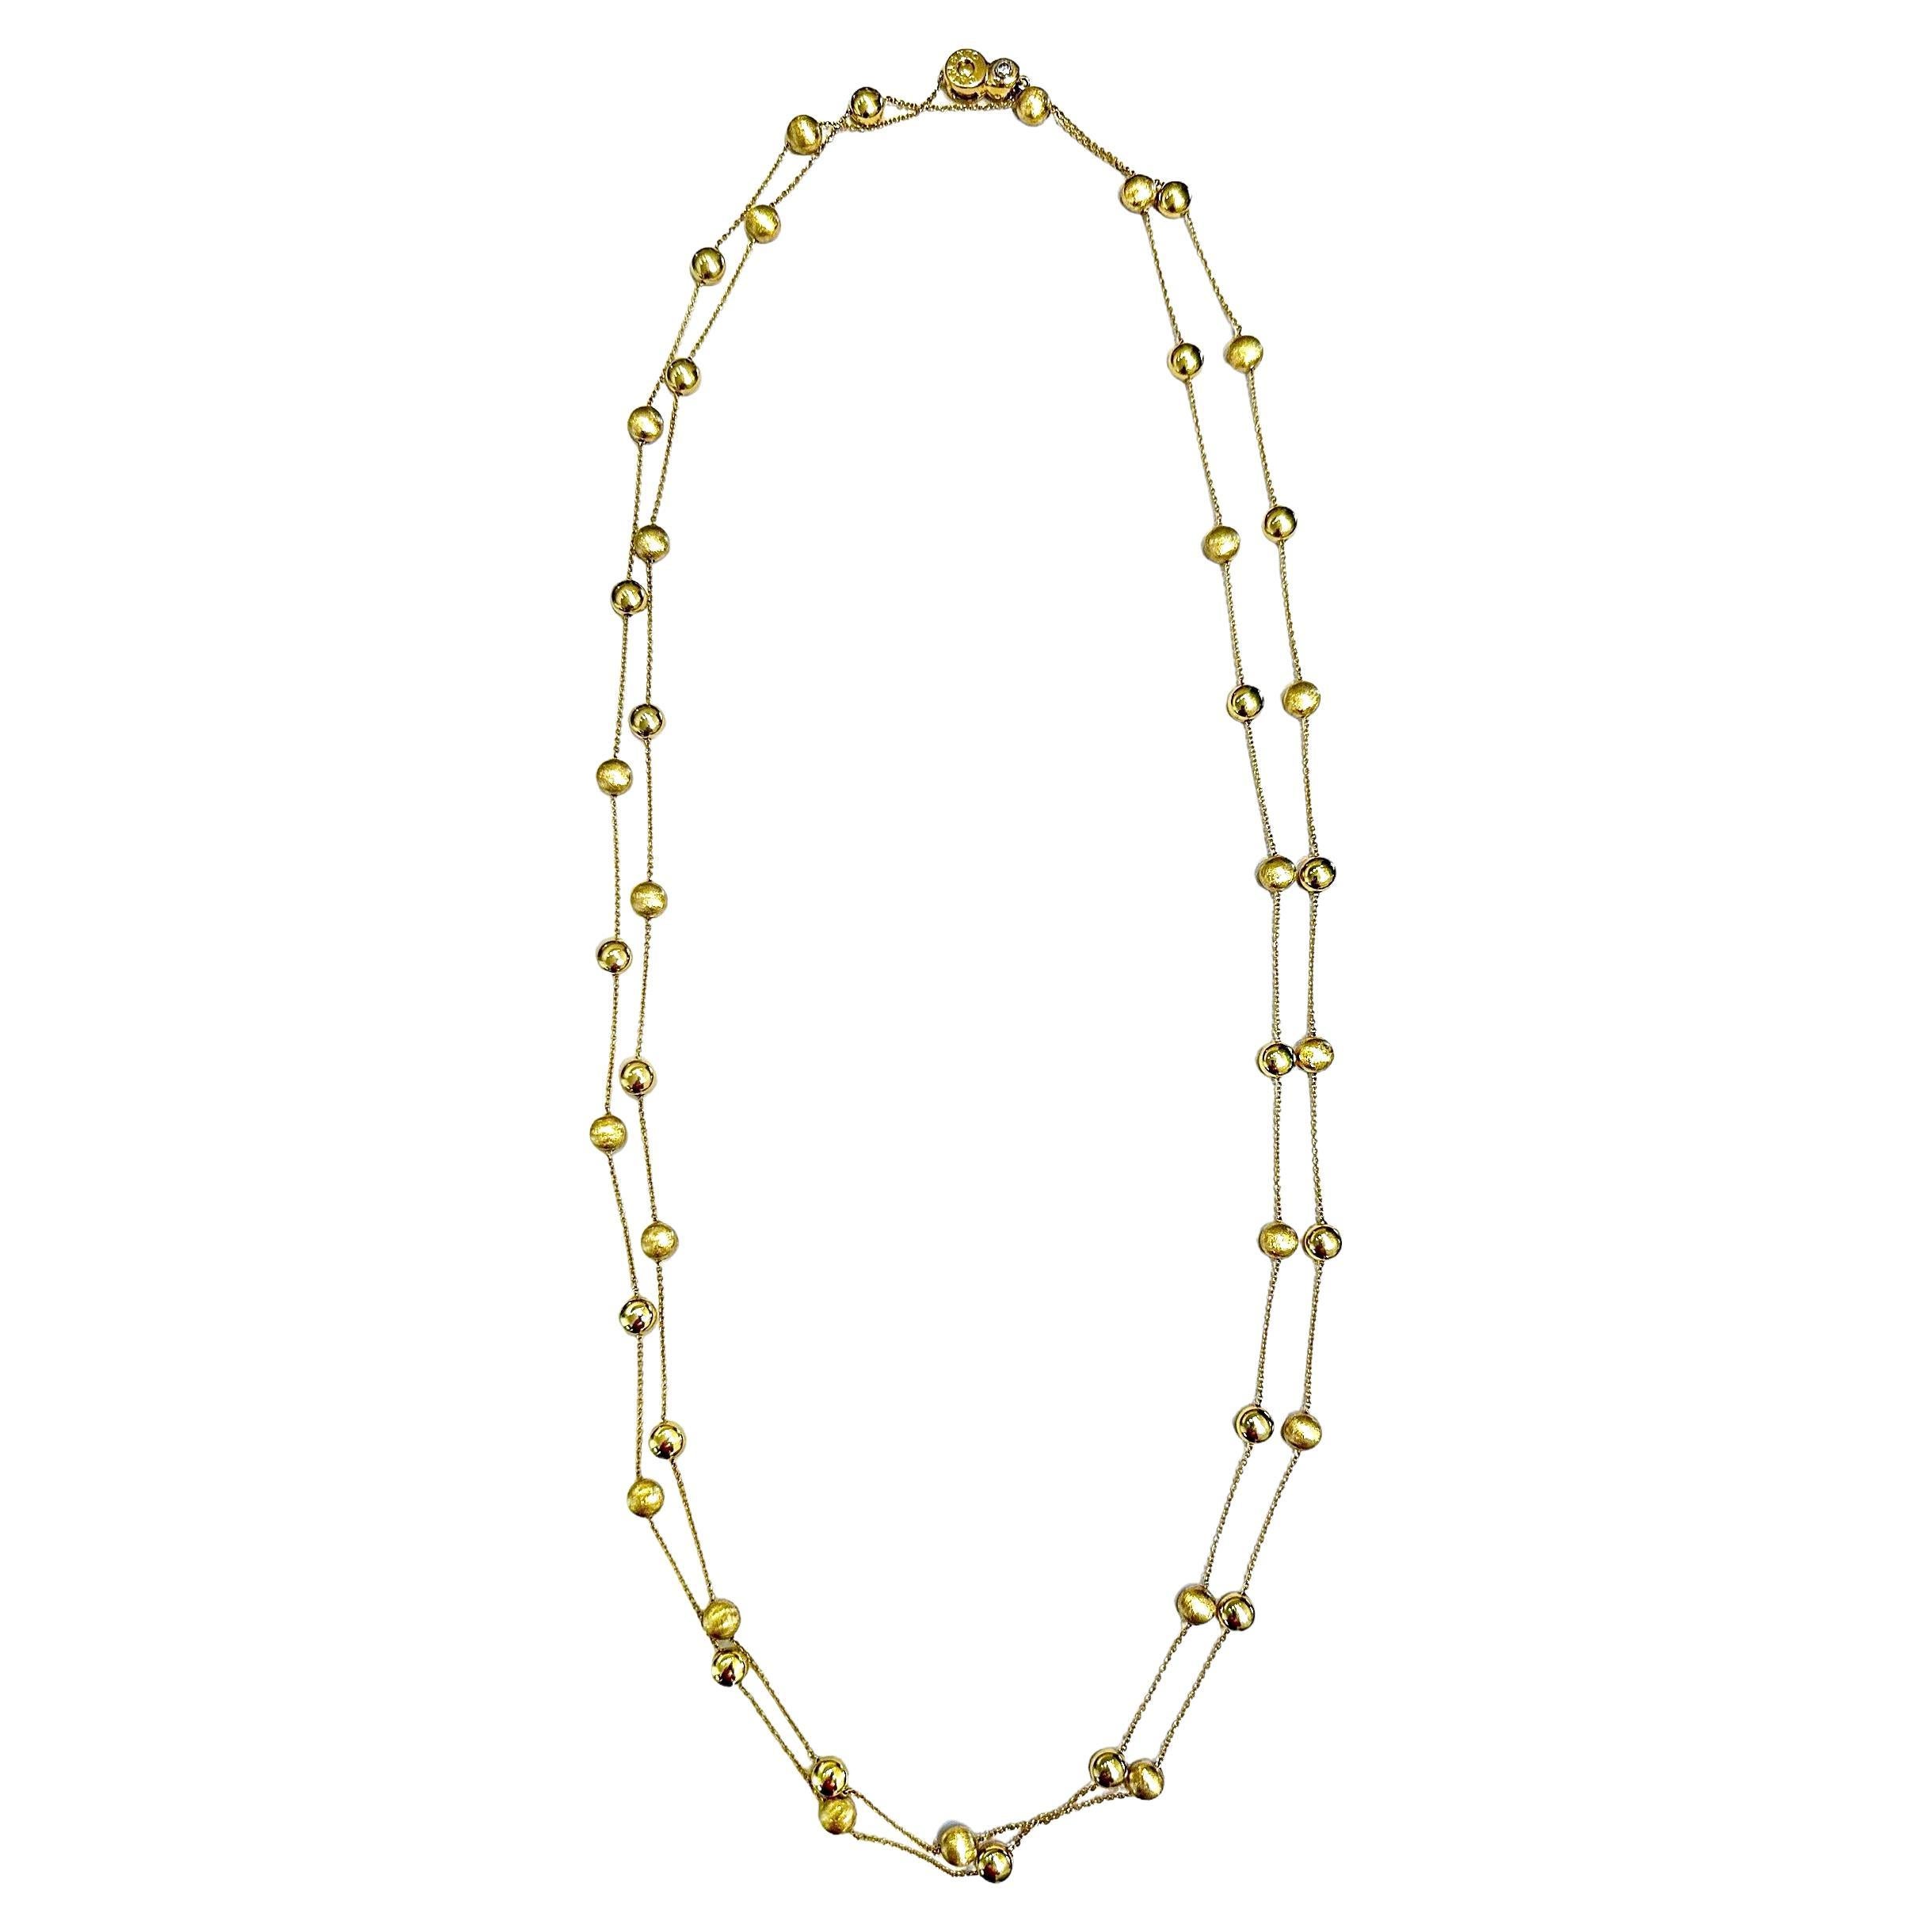 This stylish 18k yellow gold creation by respected Italian Manufacturer Chimento, is an amazing 54 inches in length. The .70mm cable link chain is punctuated every 1 1/8 inches by alternating 6mm high polish and double Florentine finish gold beads.